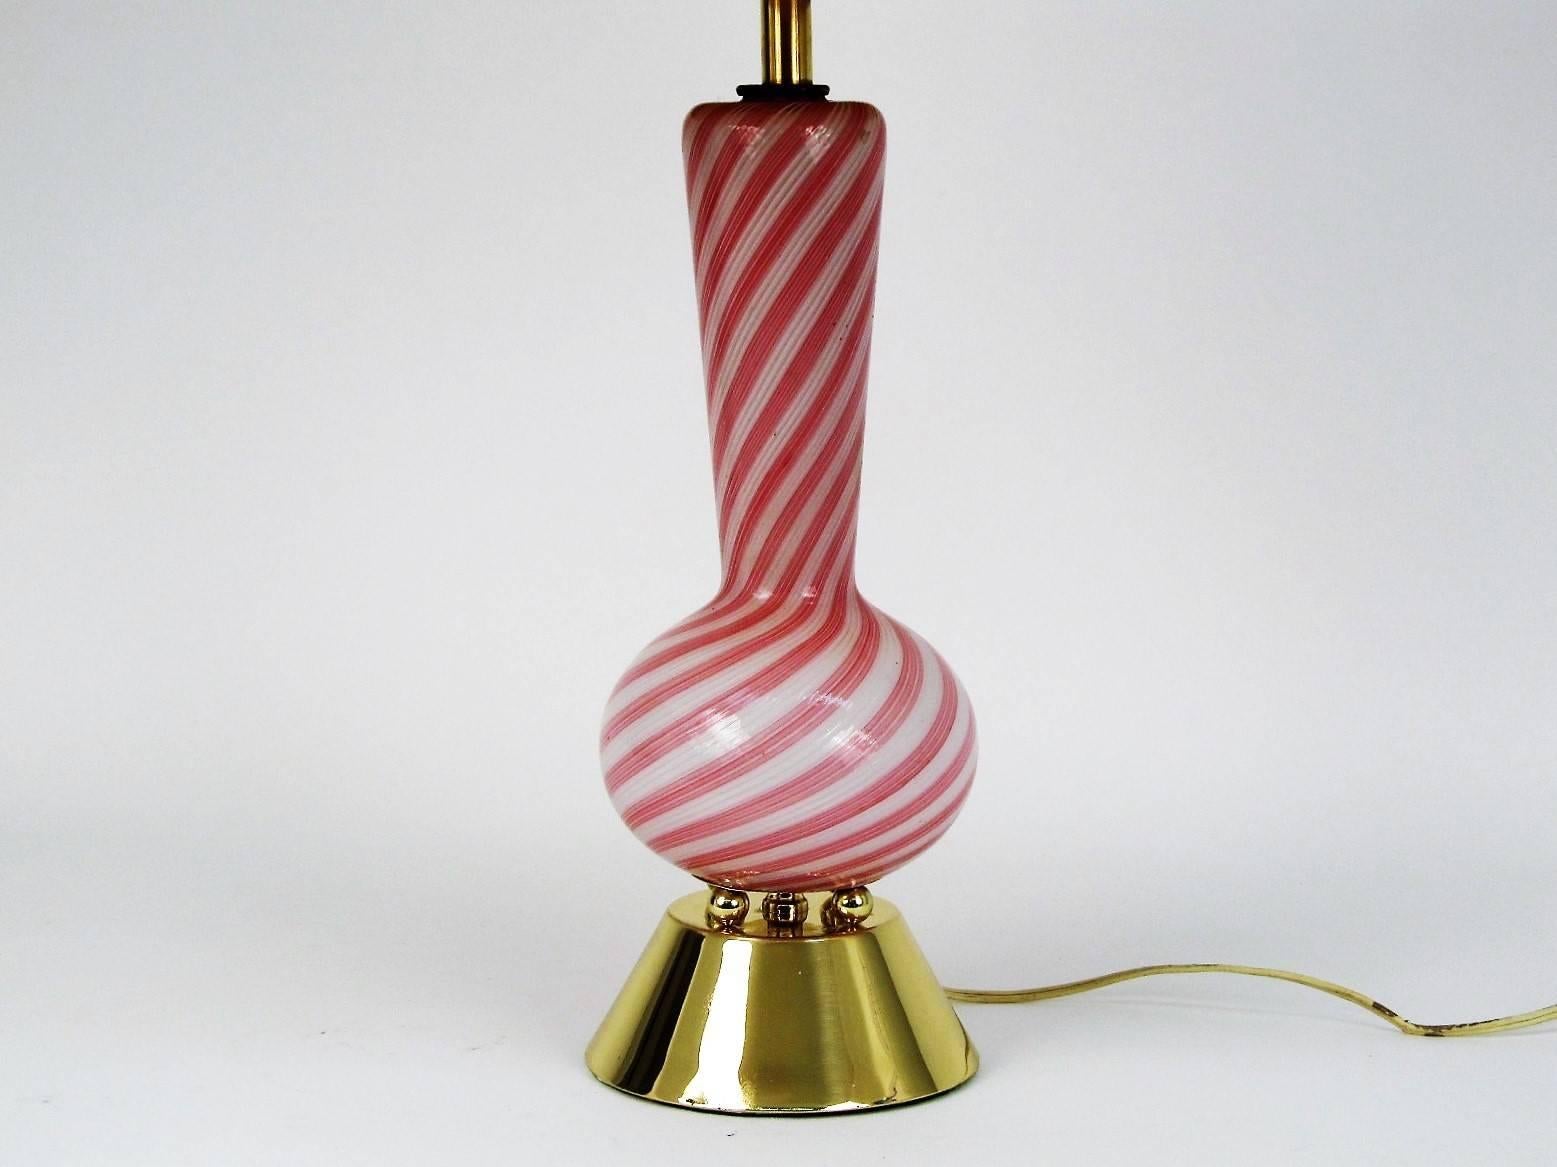 Pretty in pink, this lovely Murano glass lamp displays the exacting craftsmanship that Murano glass is world famous for. Precise alternating pink and white canes of glass swirled and shaped into a beautiful table lamp. 

Shade is not original, and